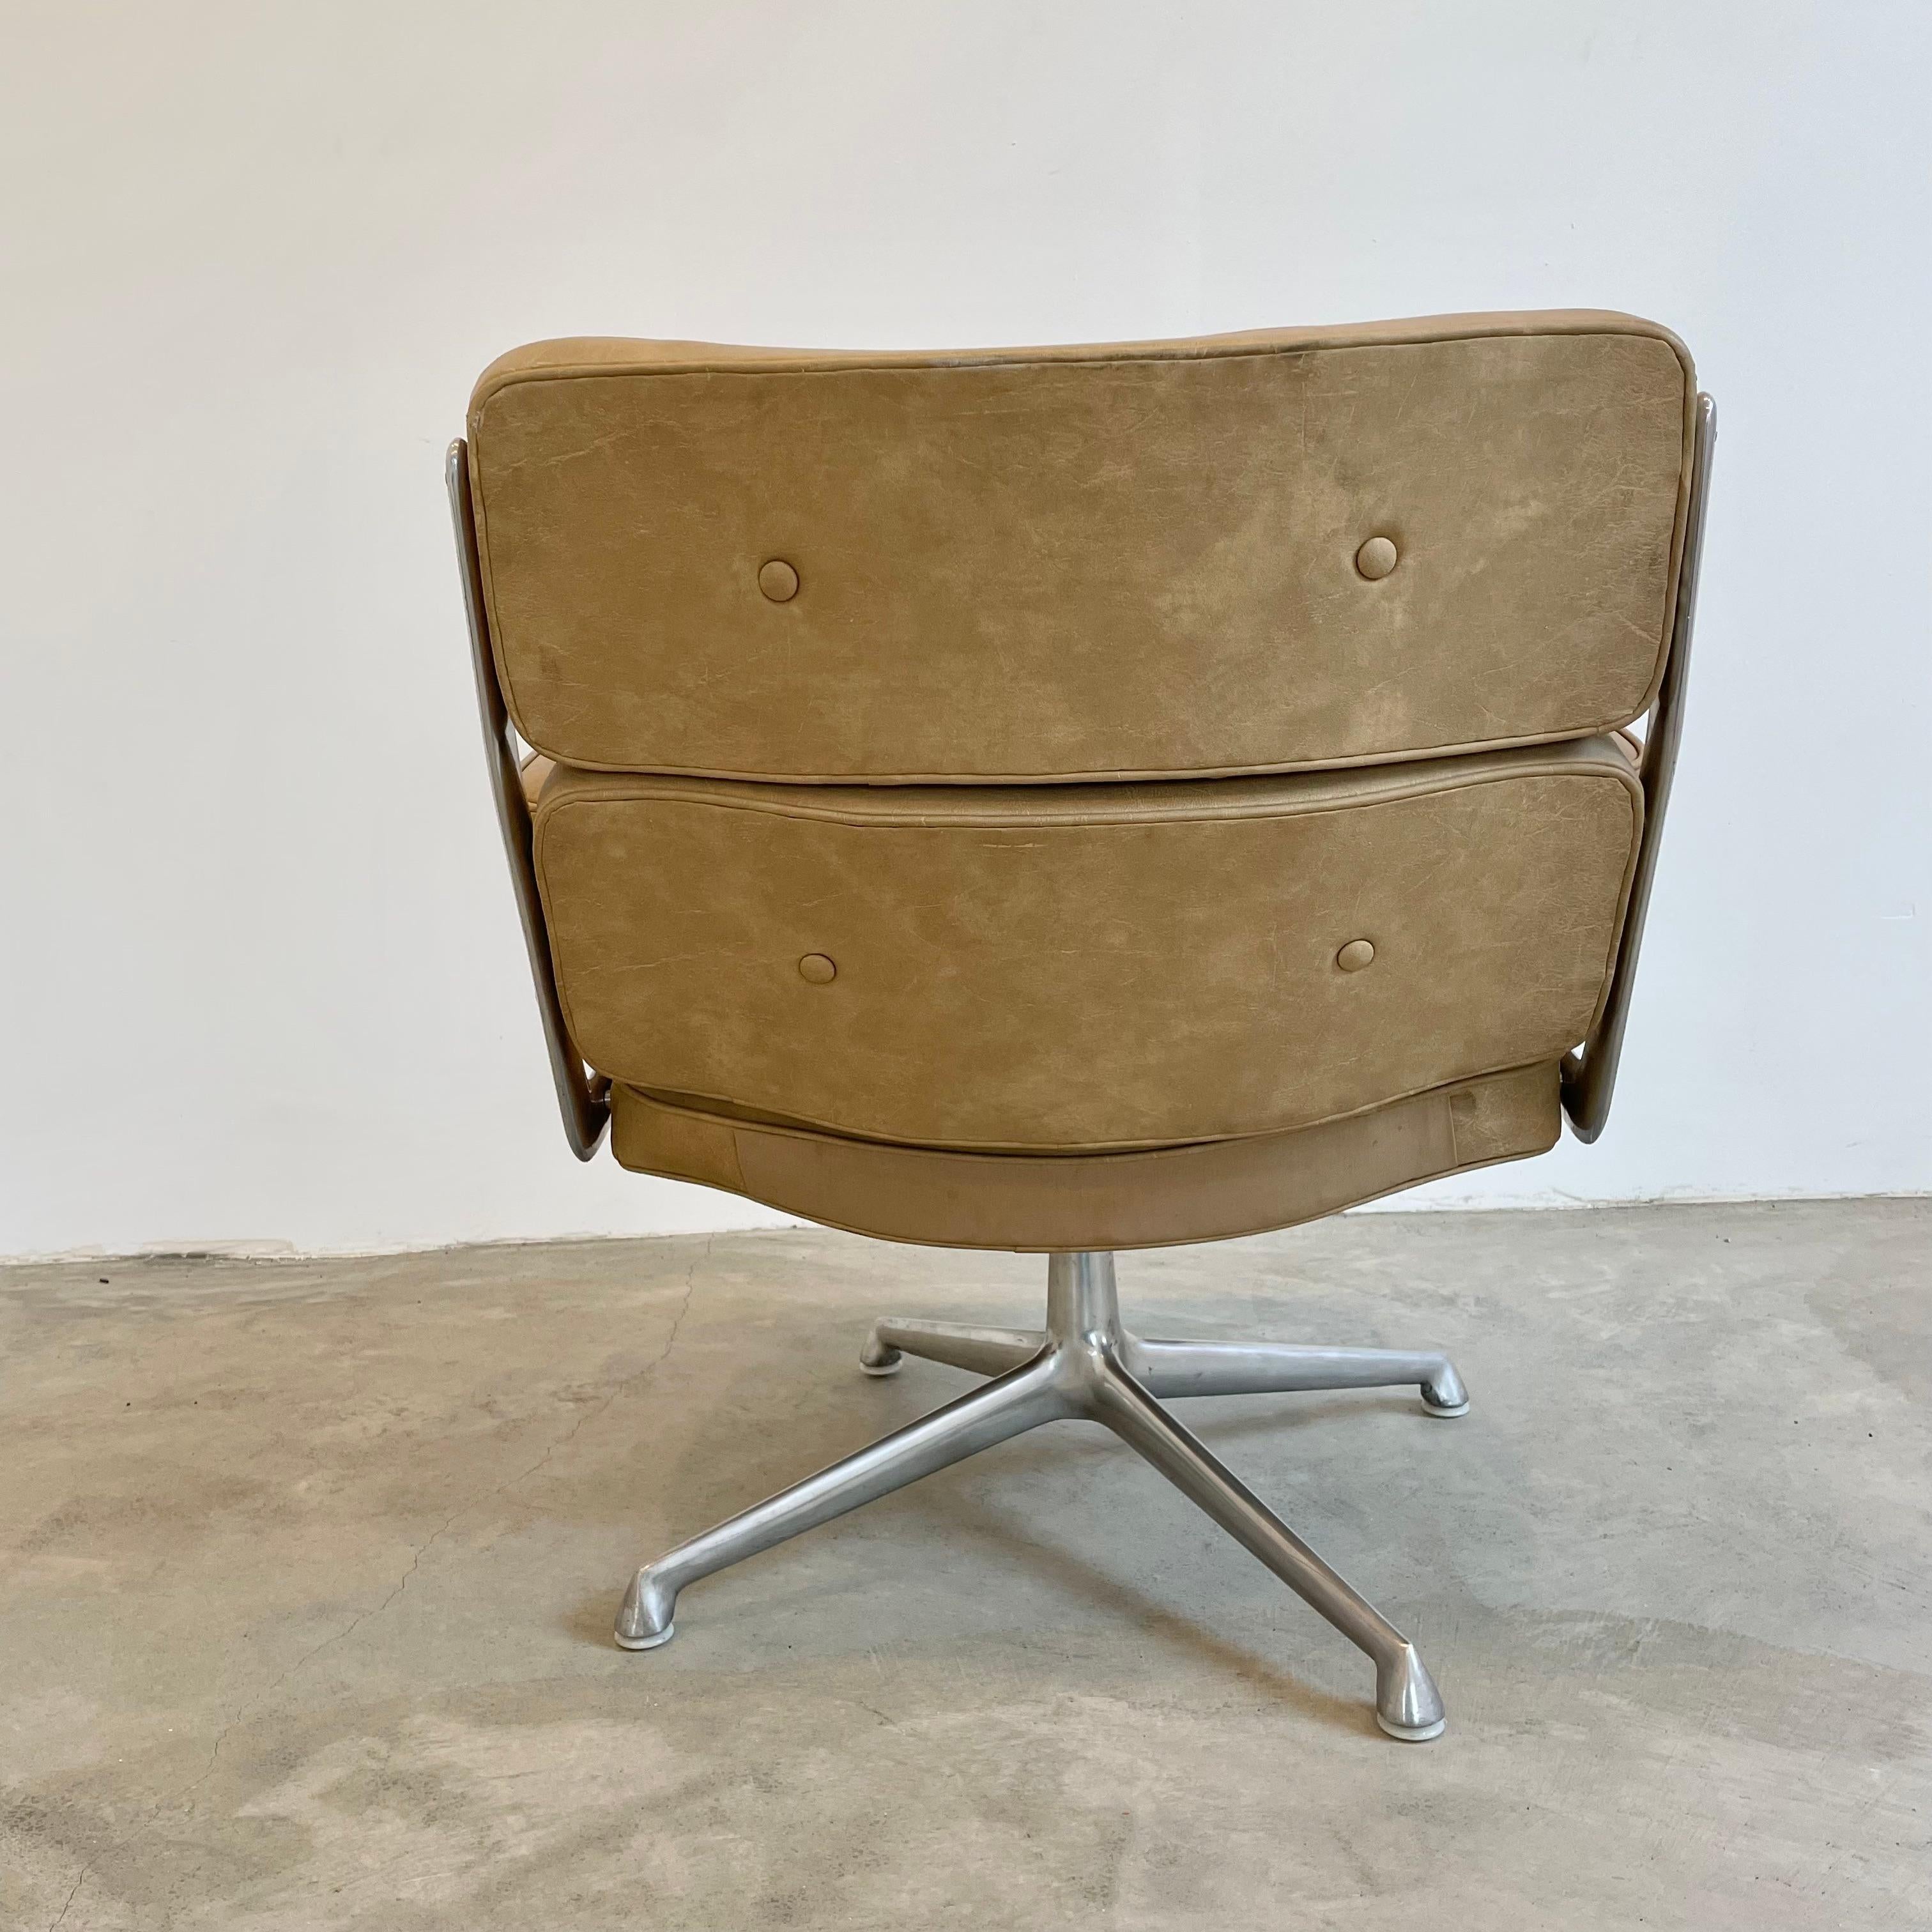 Vintage Eames Time Life Lobby Chair in Camel 1